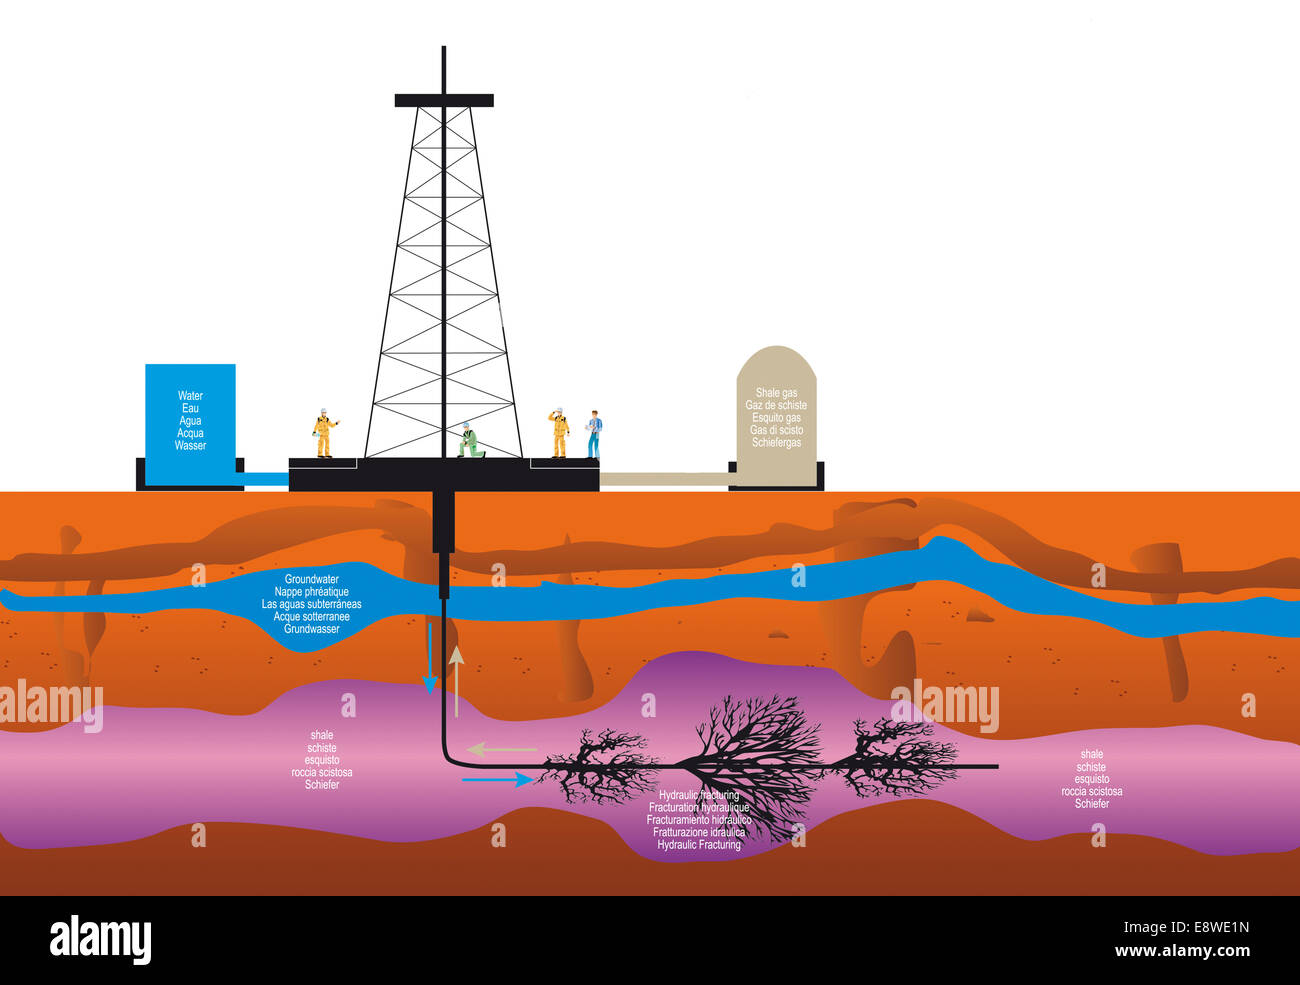 illustration of a drilling extraction hydraulic fracturing of shale gas for geothermal sustainable energy Stock Photo